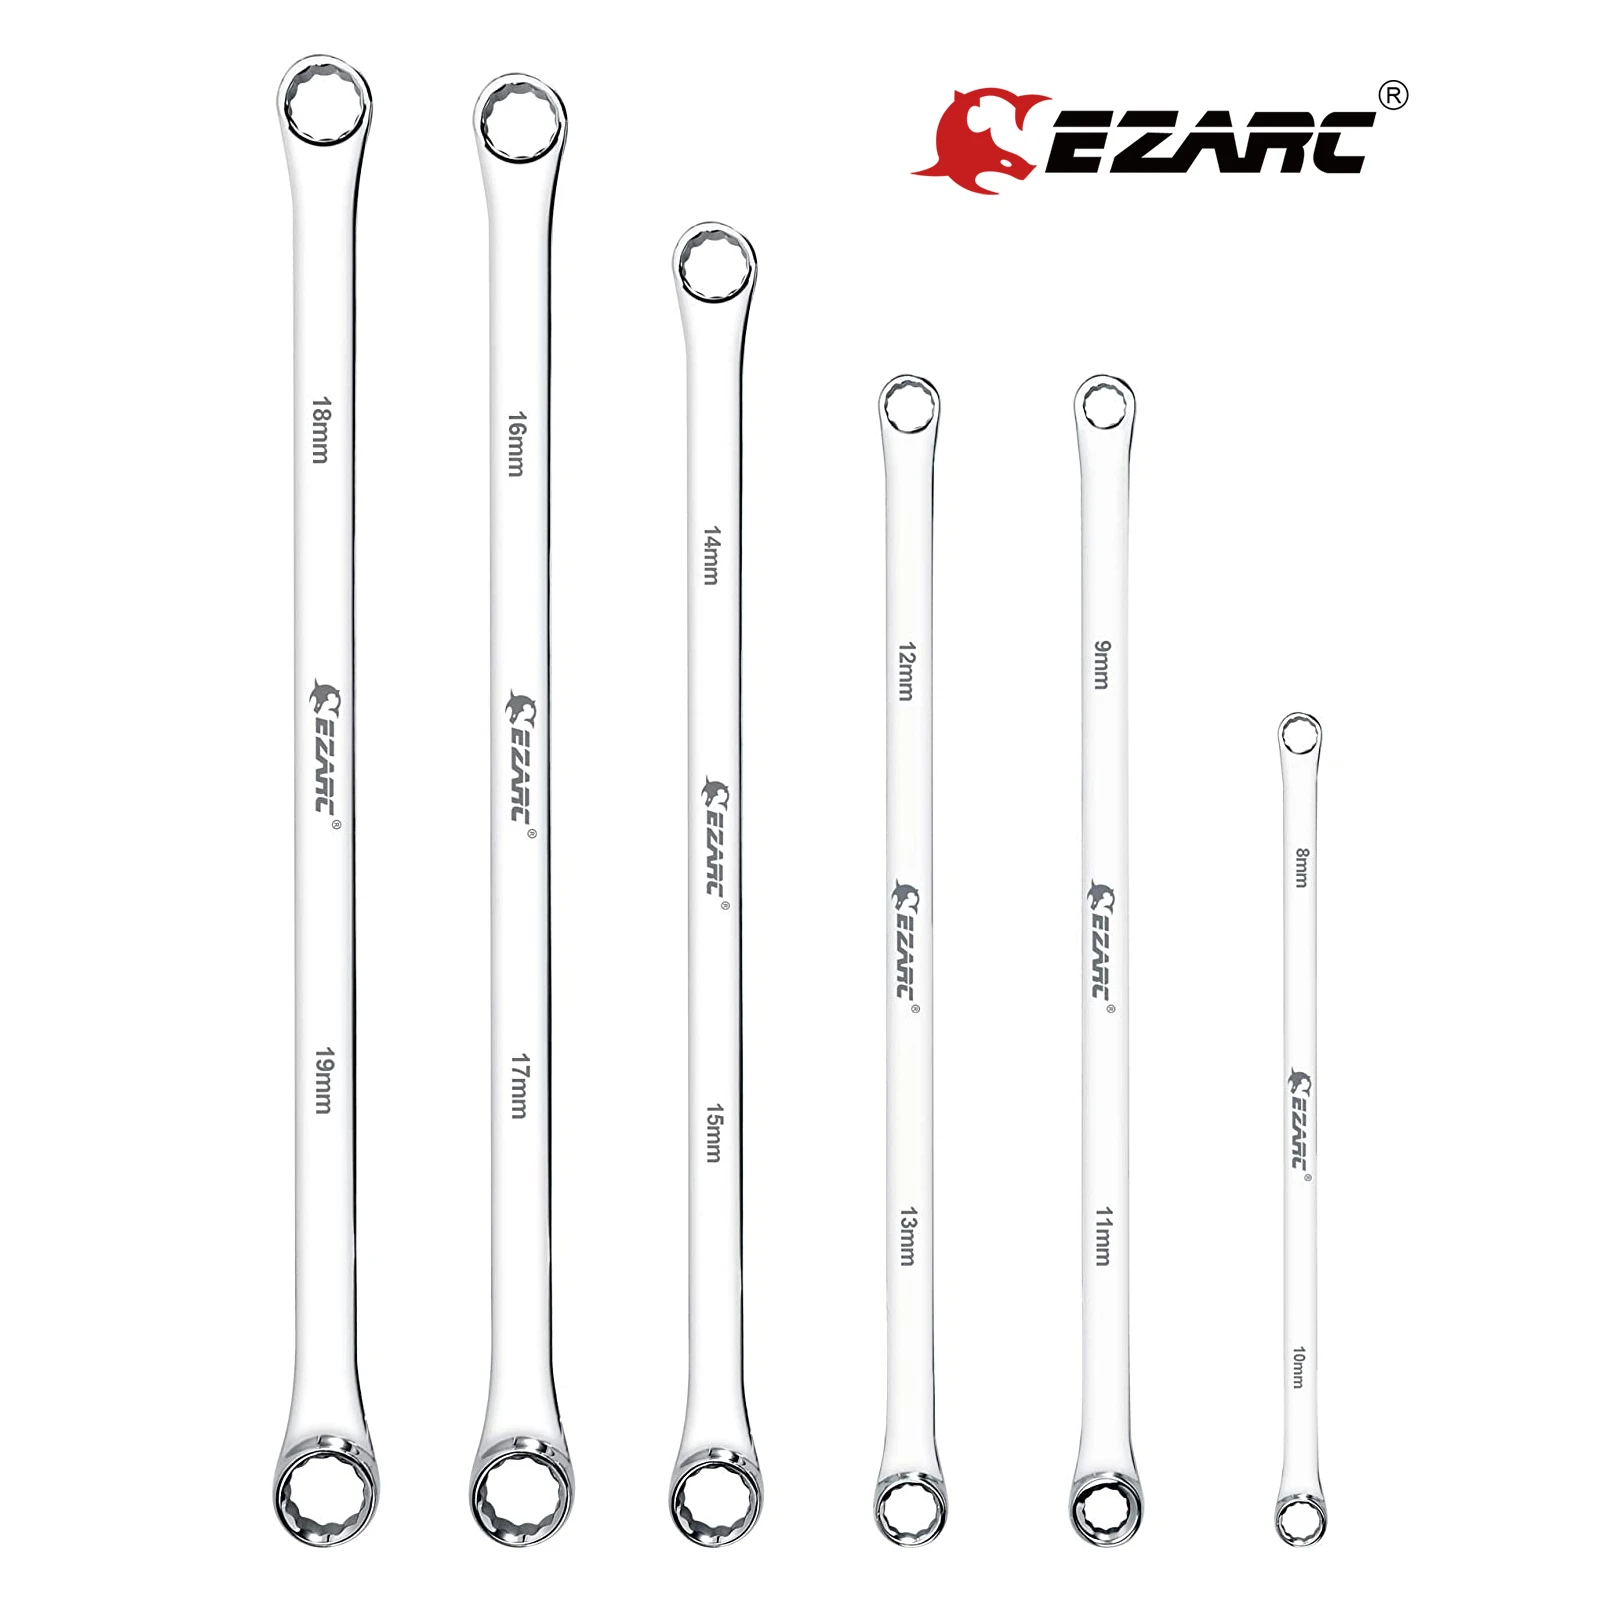 EZARC Extra Long Double Ring Box End Spanner Aviation Wrench Strong Power Less Effort Metric 8-10 9-11 12-13 14-15 16-17 18-19mm